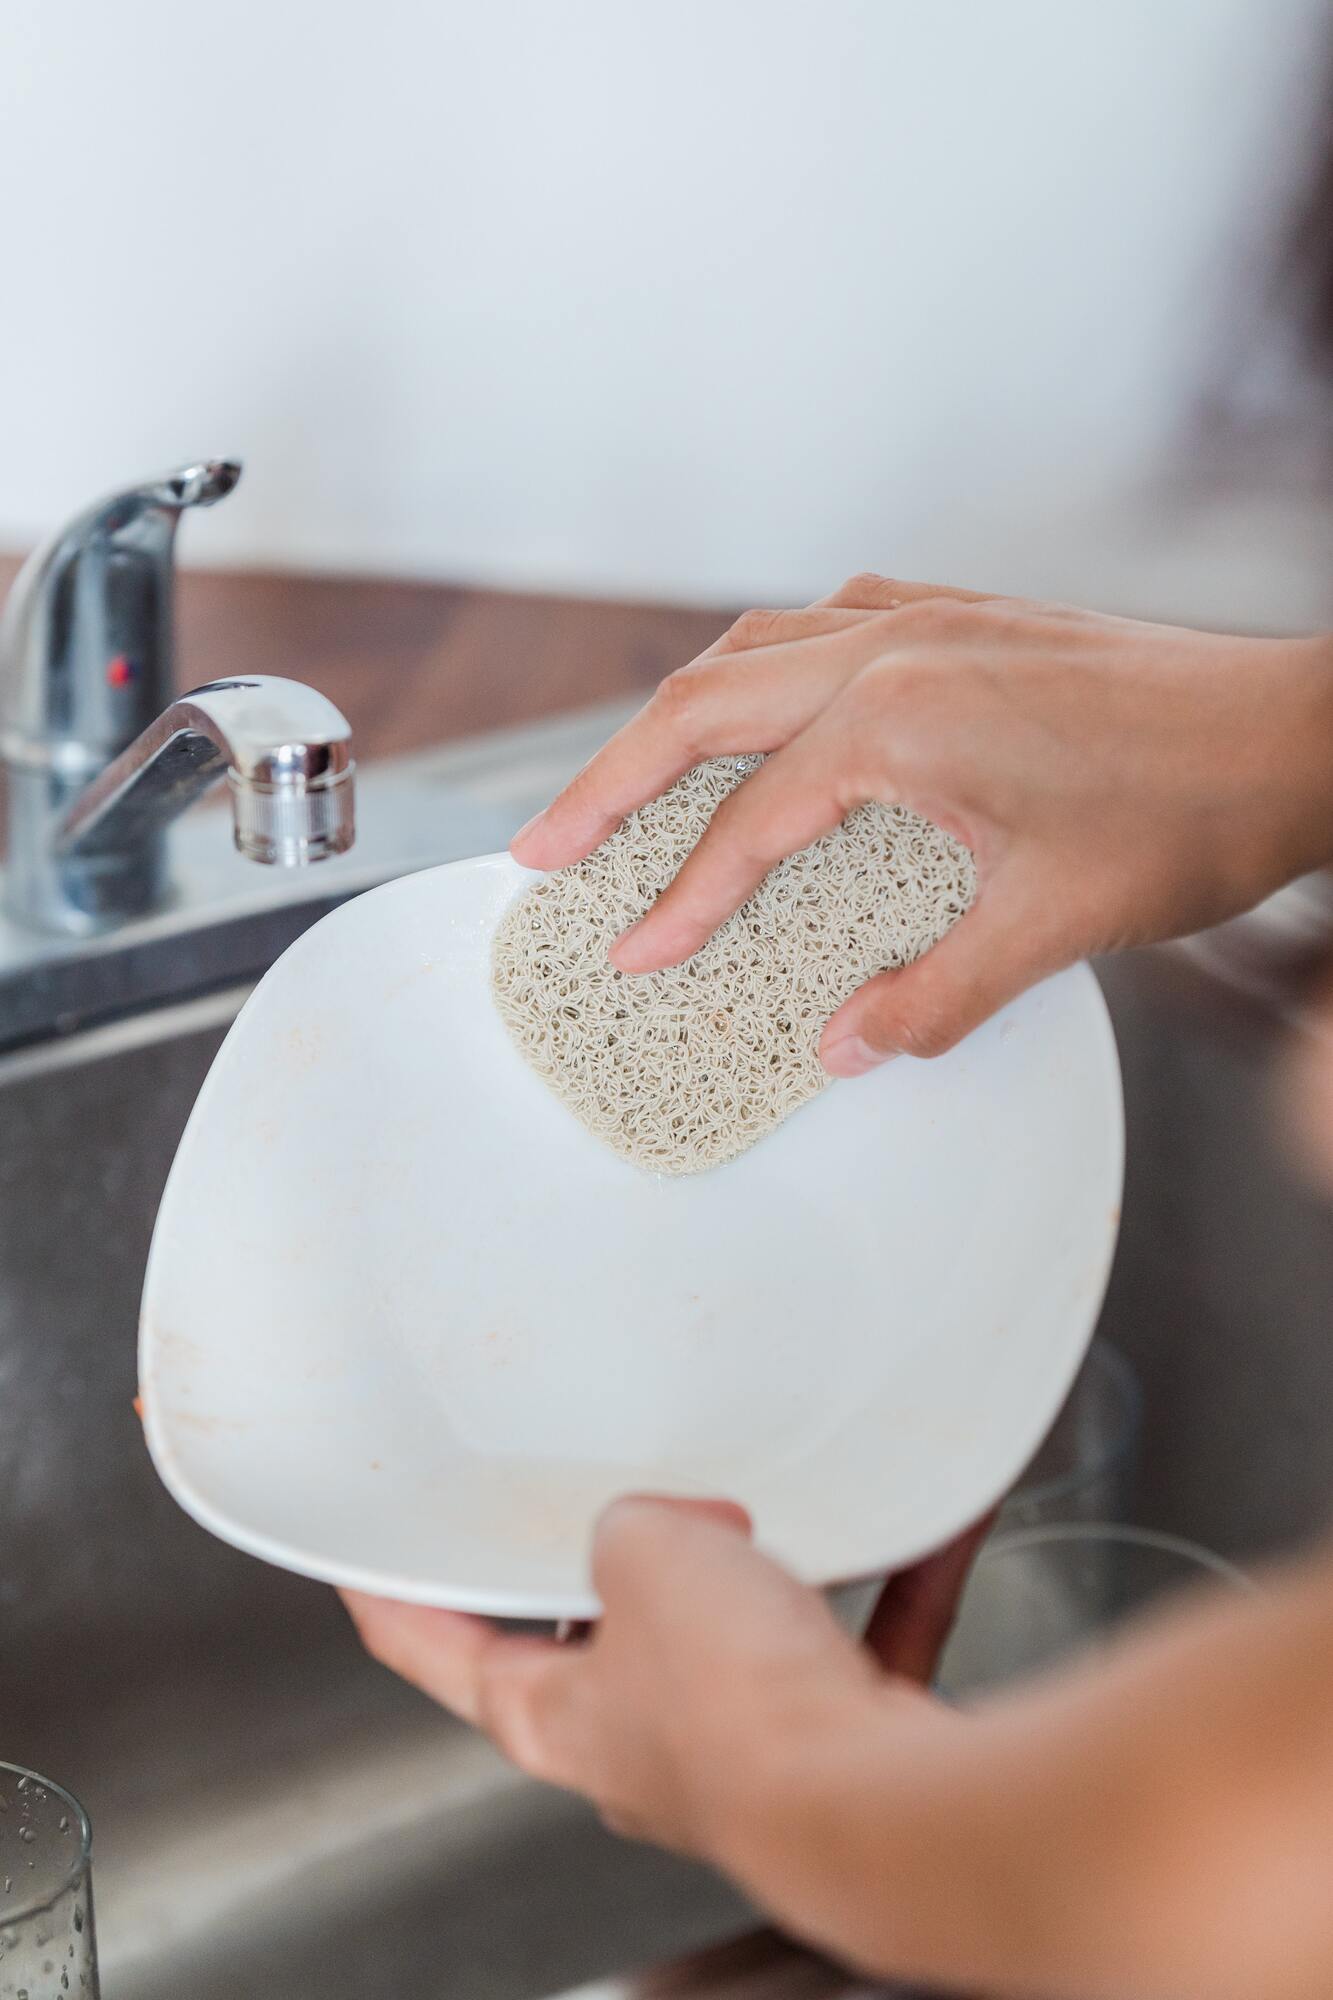 How to wash dishes properly